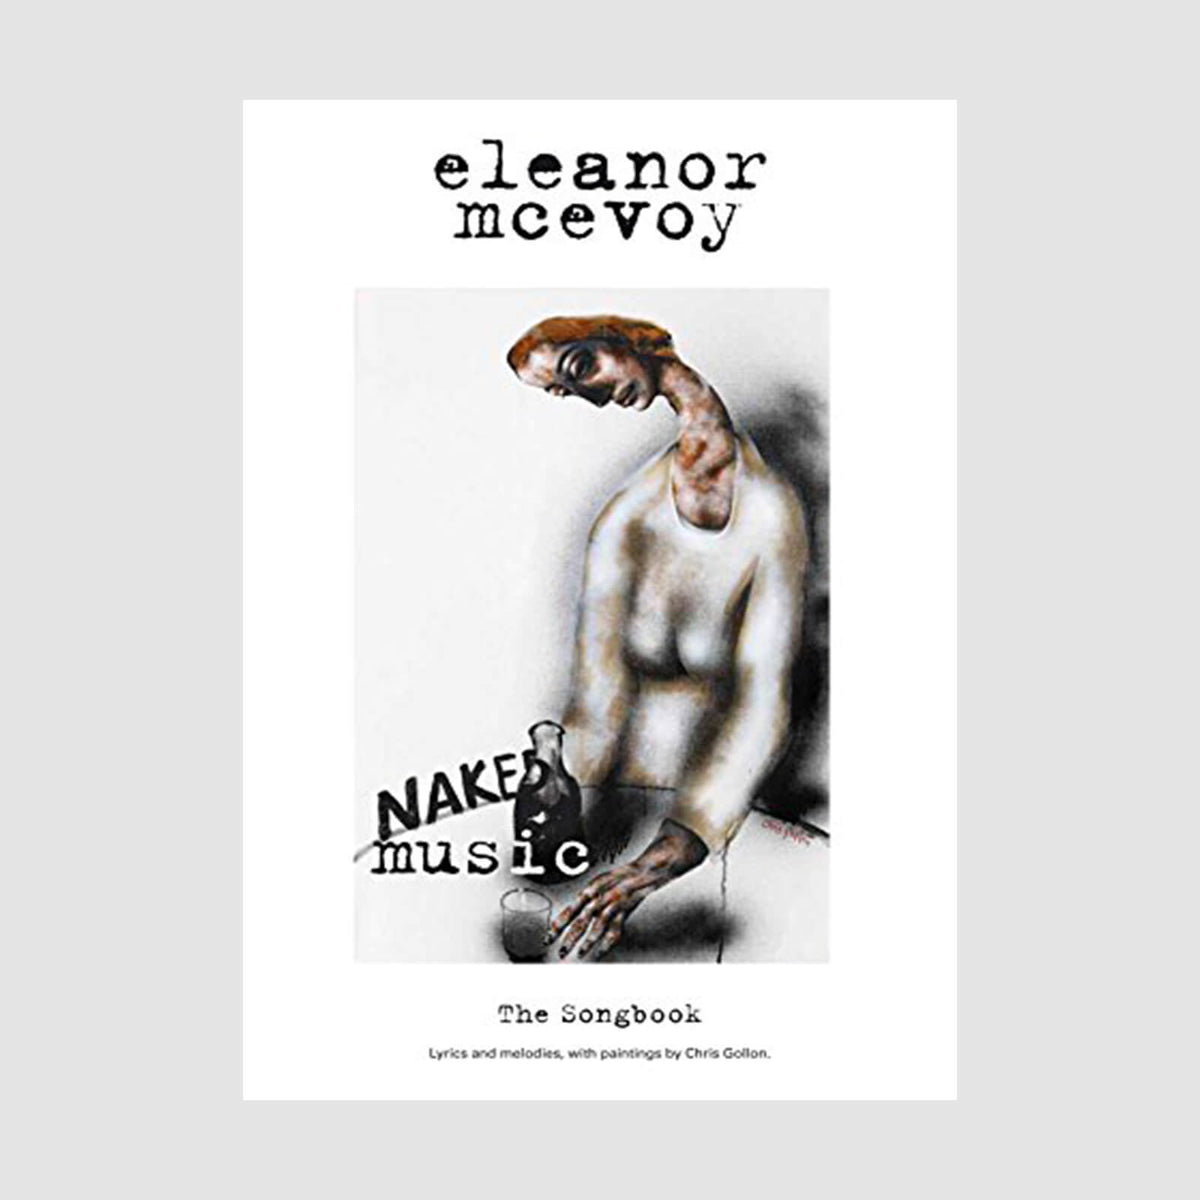 Eleanor McEvoy : Naked Music - The Songbook